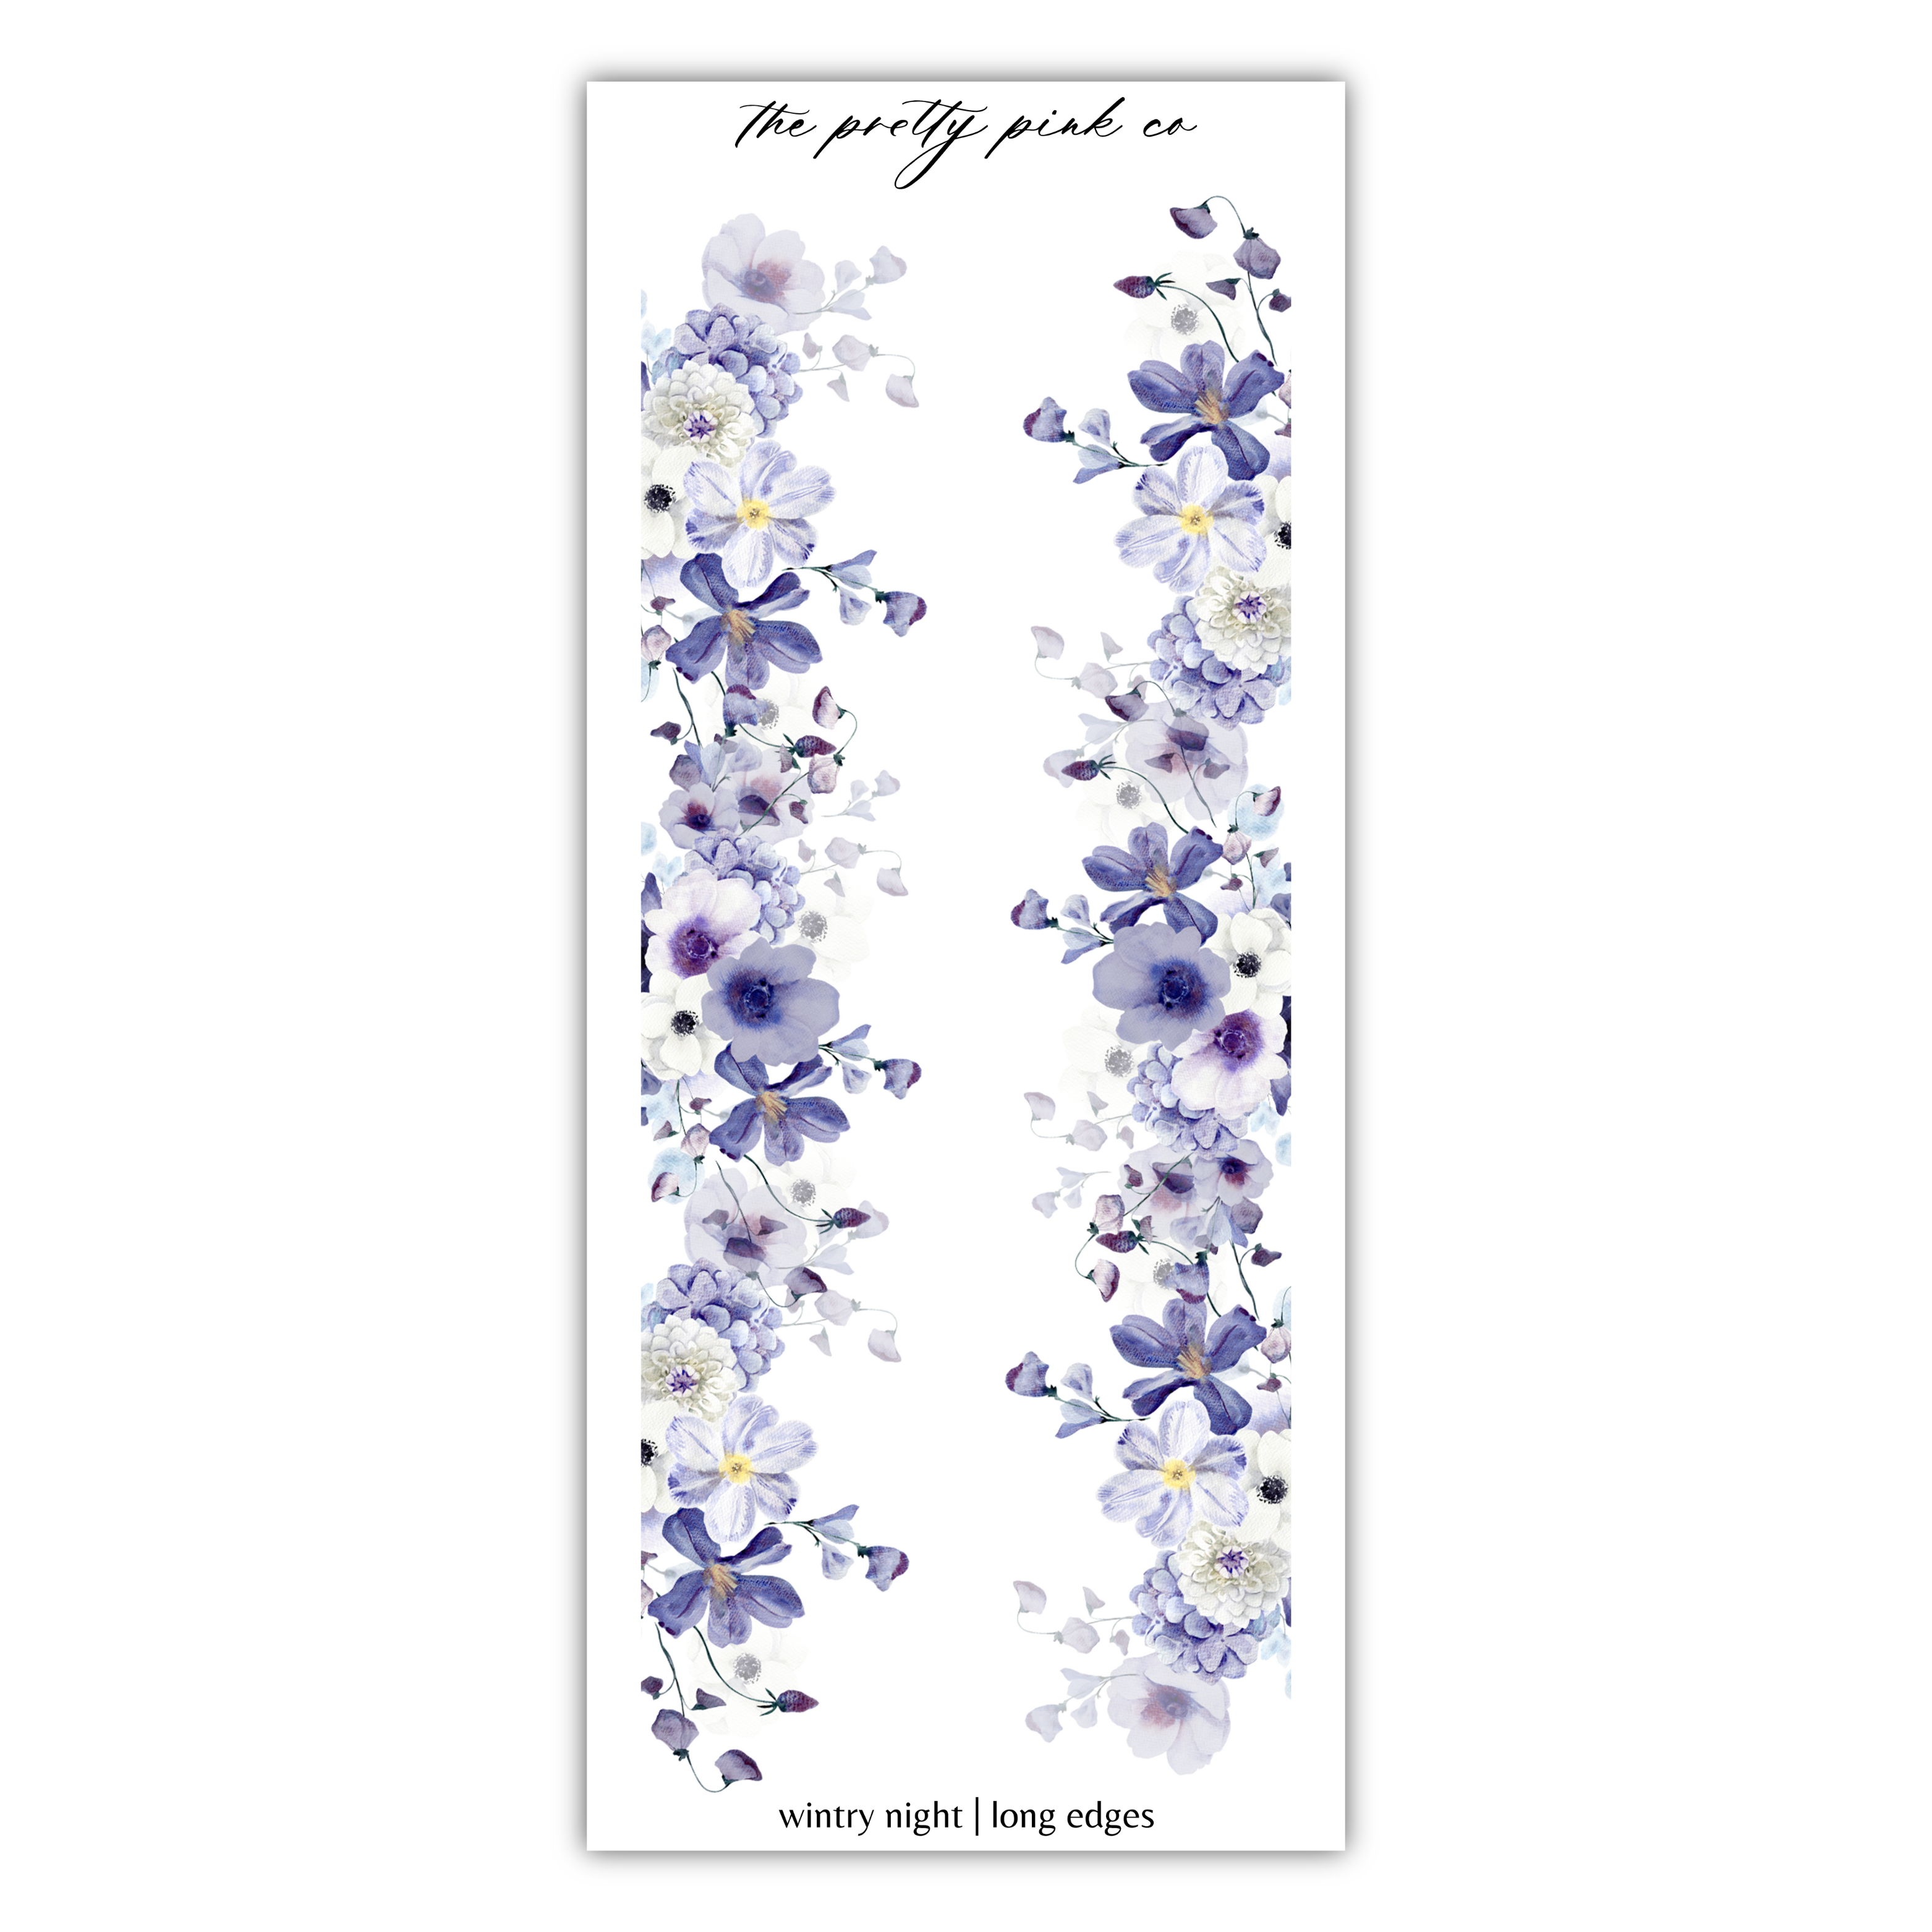 a sticker with flowers and words on it